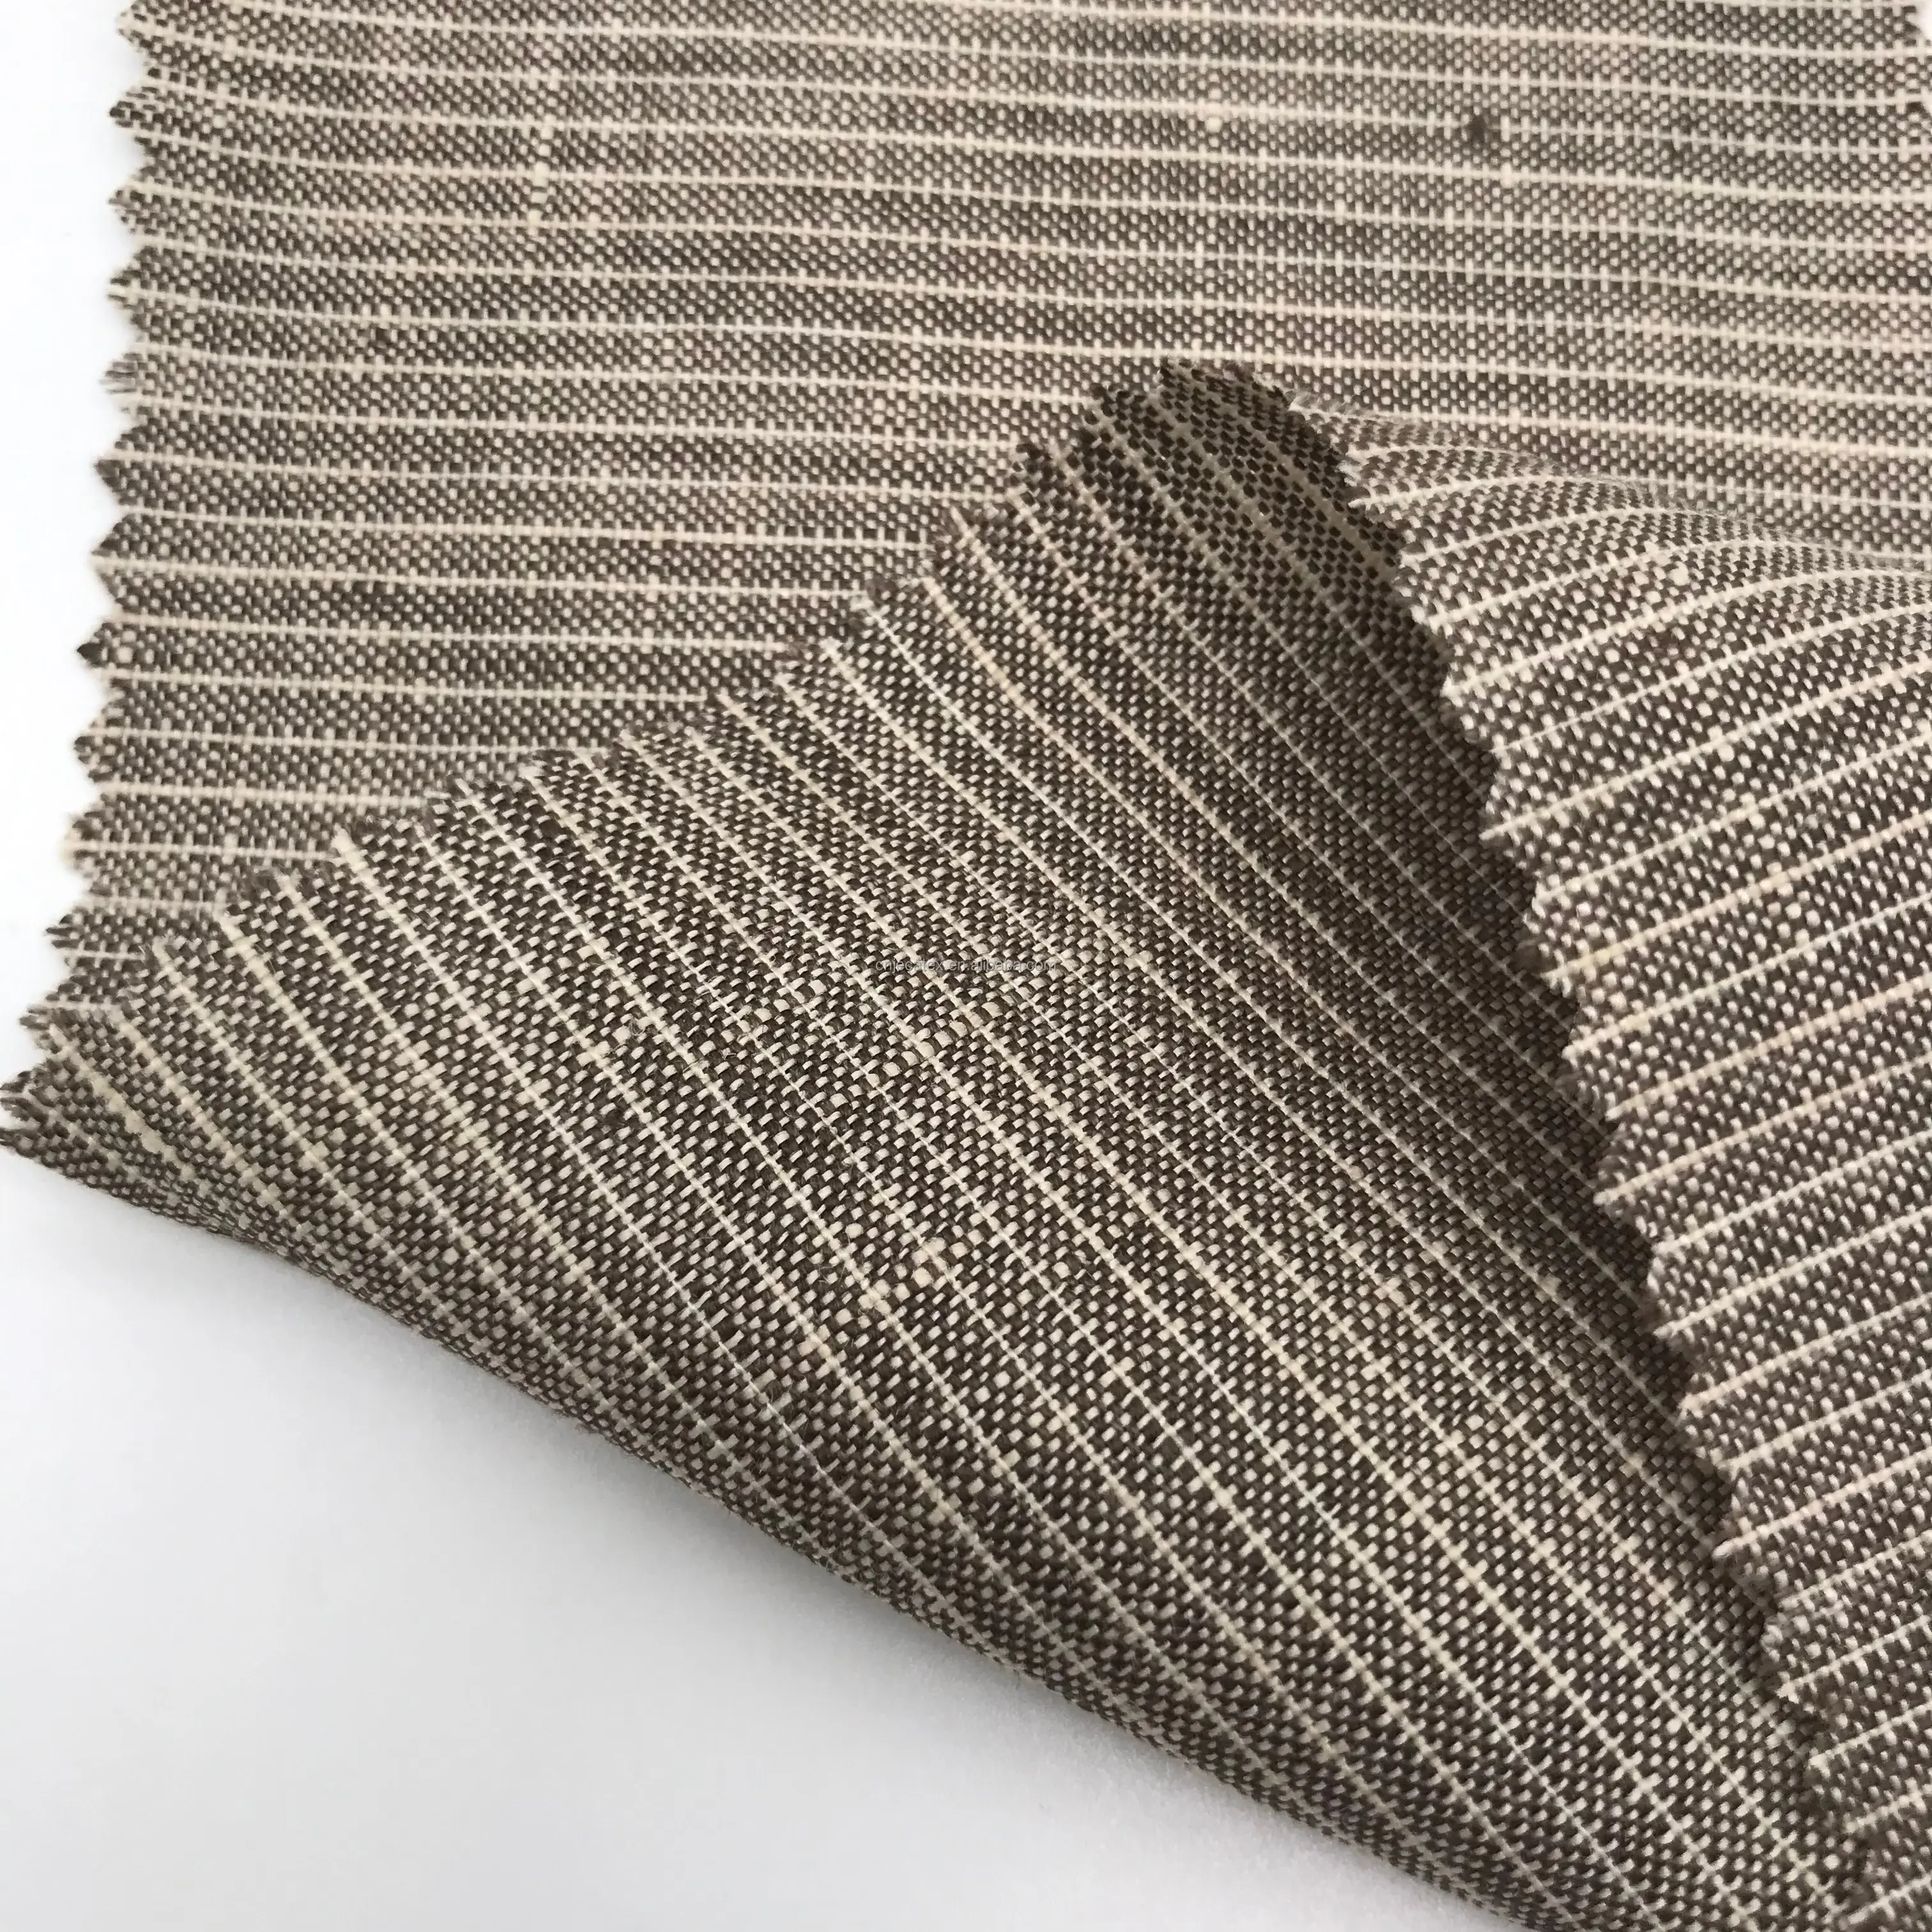 JECA PIATTI/48TFE 100% Linen Yarn dyed Fabric Strip   European Flax  Wholesale Sustainable ECO Friendly woven for garment